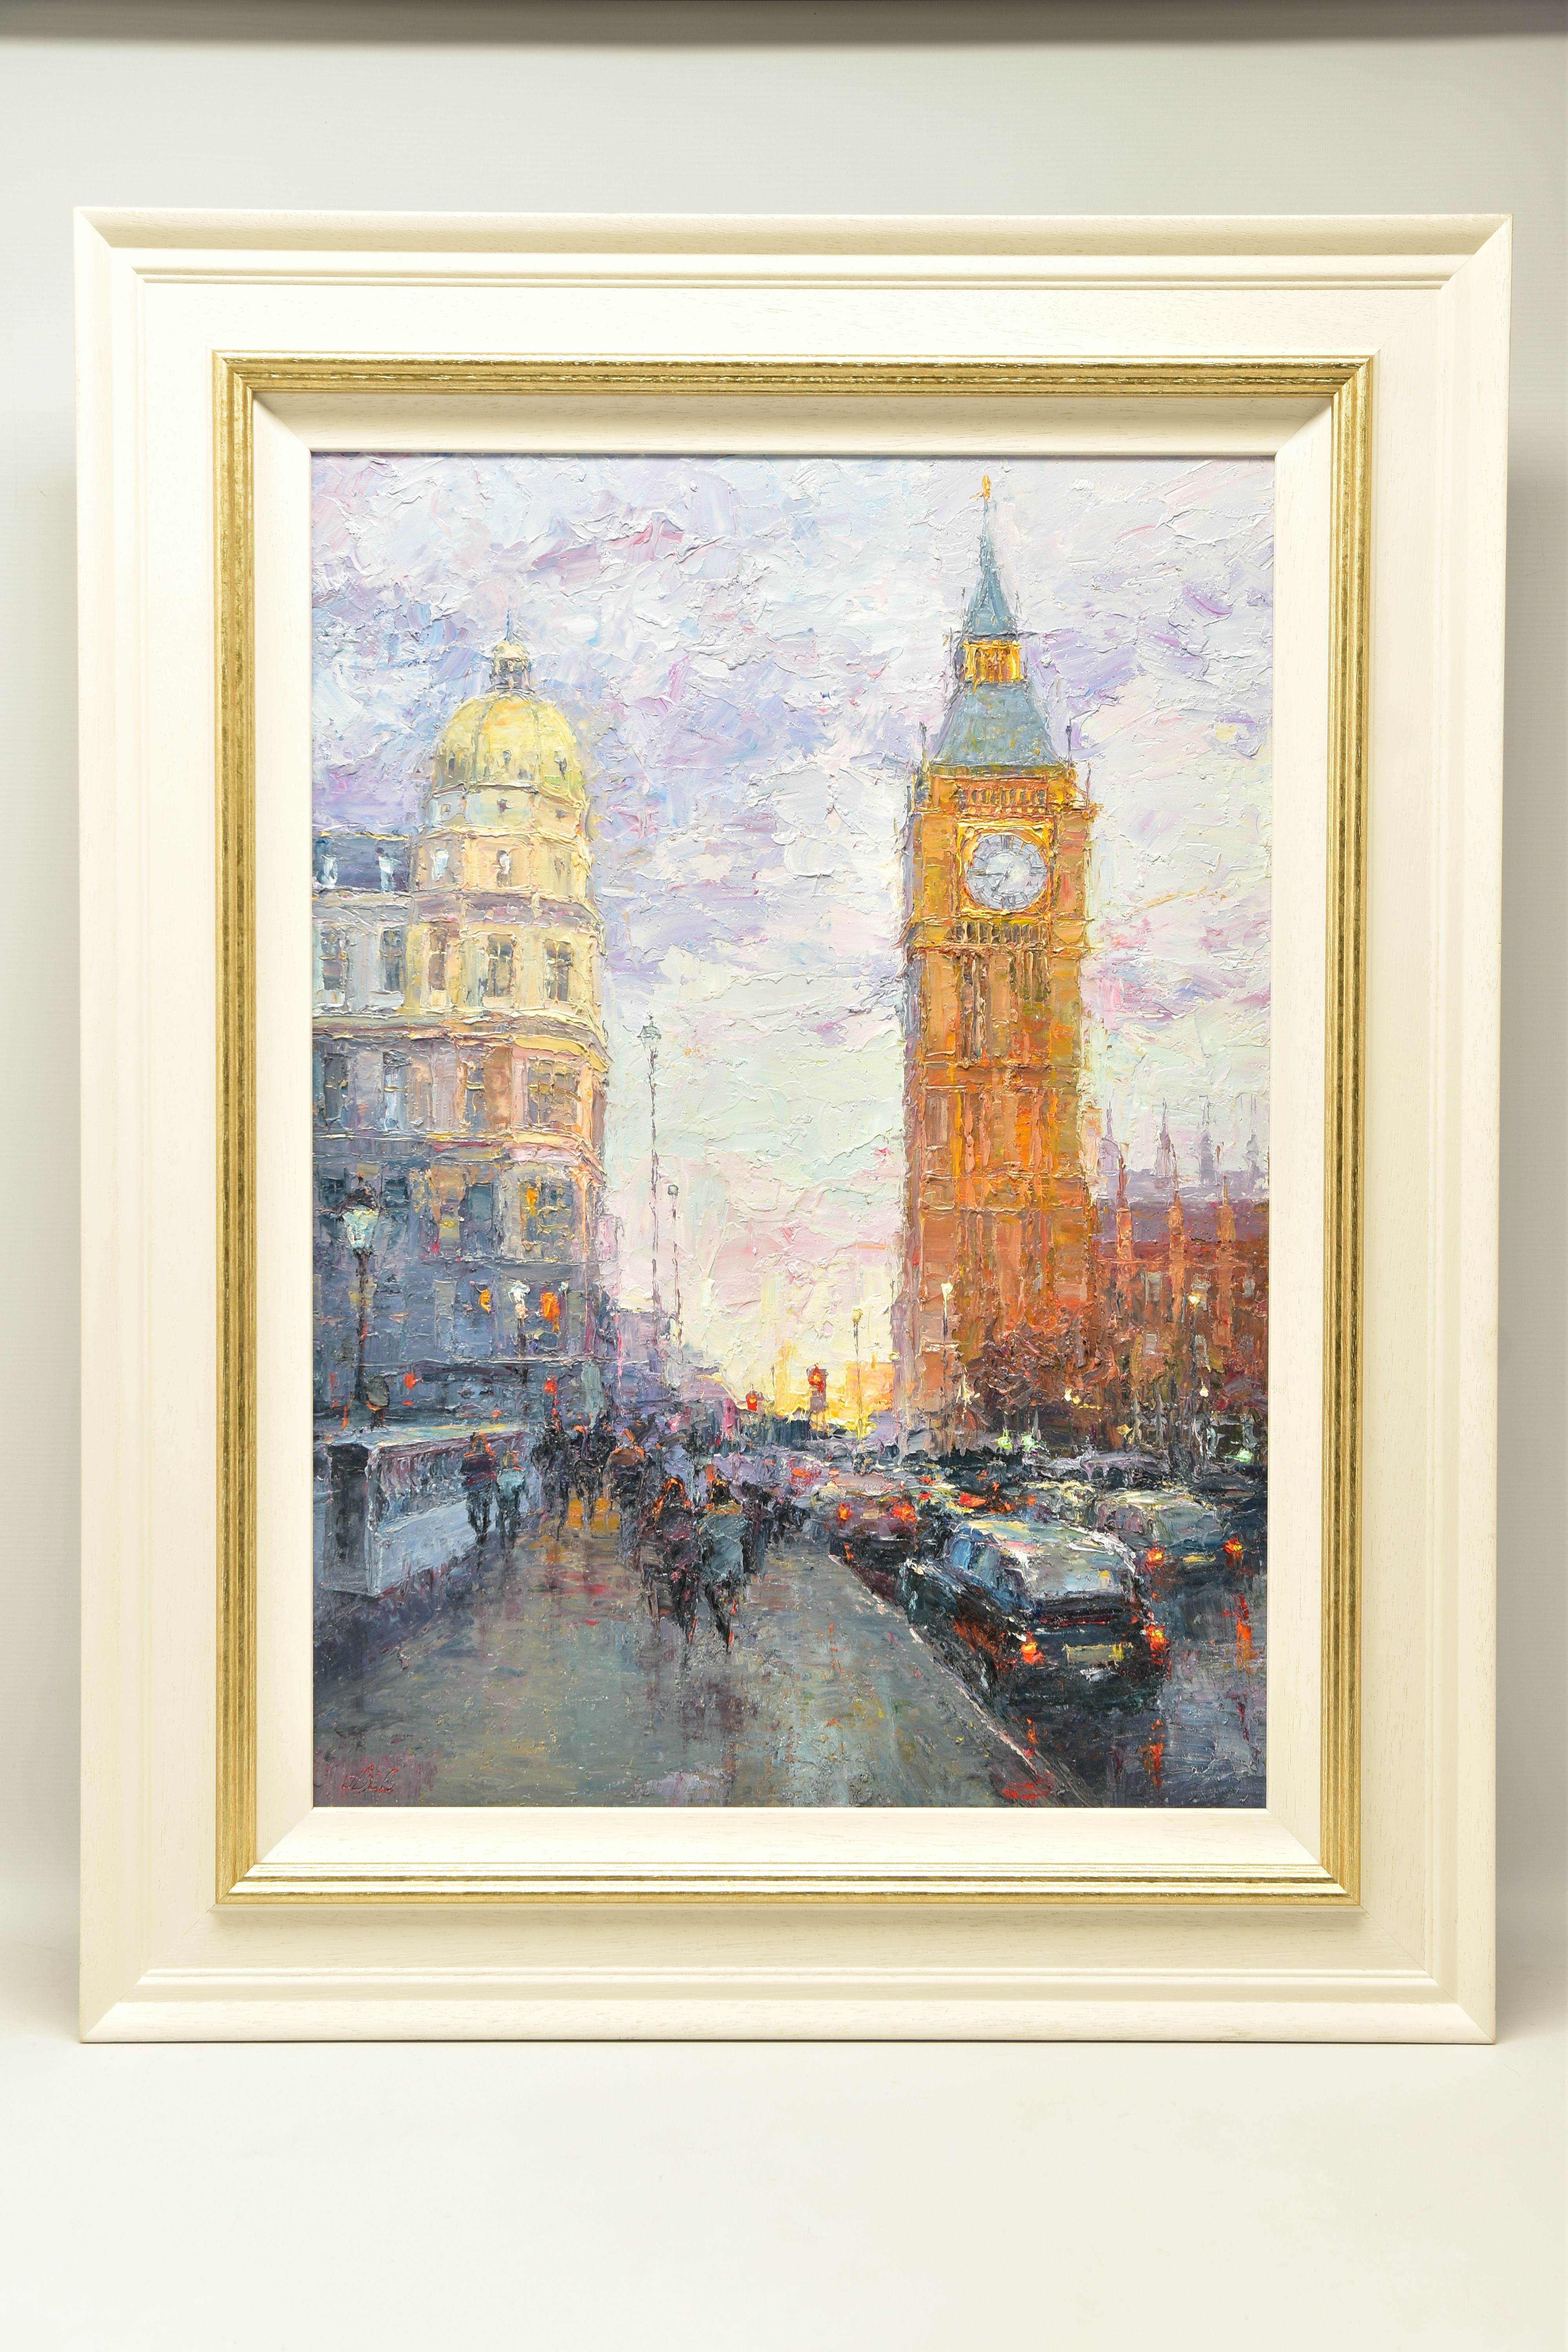 LANA OKIRO (UKRAINE CONTEMPORARY) 'AFTER THE RAIN, WESTMINSTER', an impressionist style London